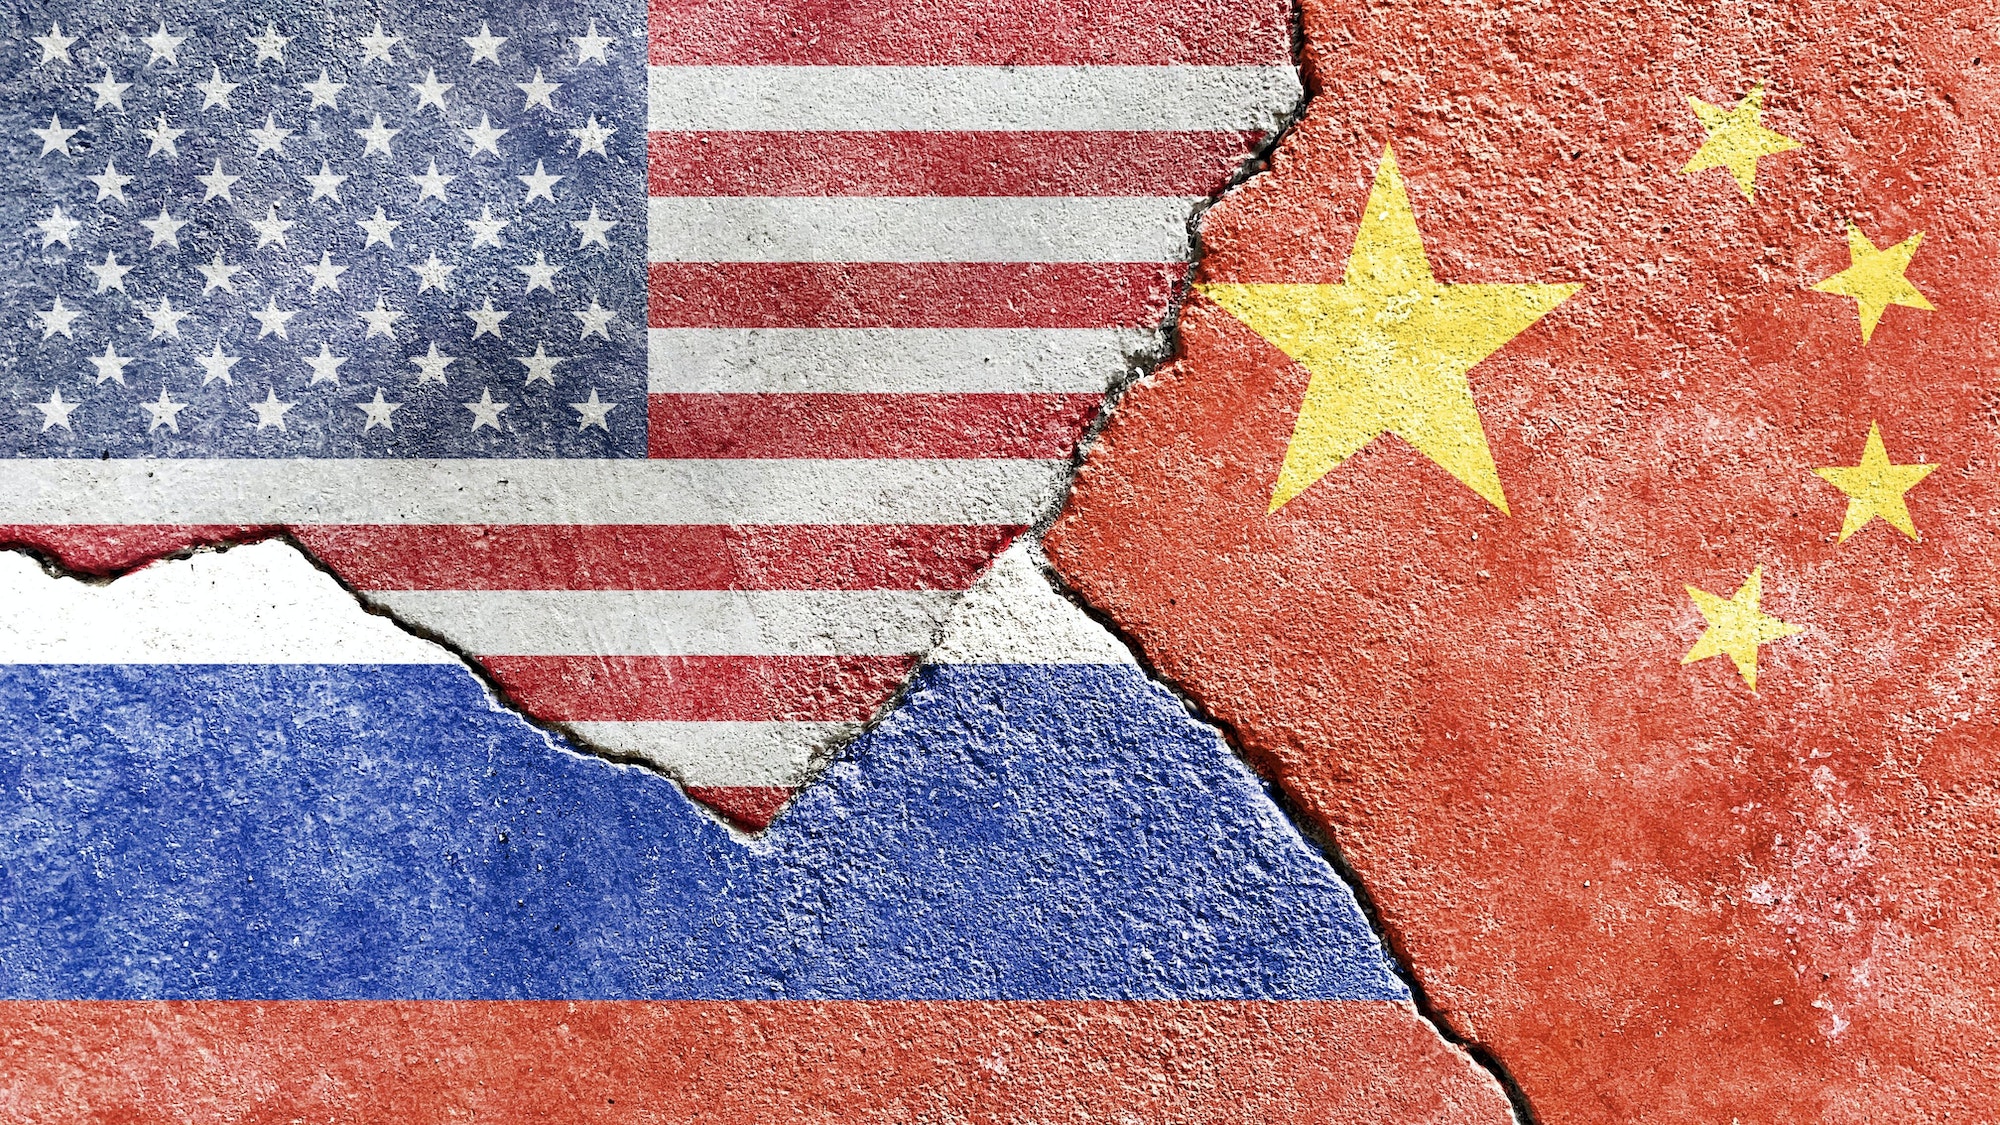 American, Chinese, and Russian flag on a cracked wall- politics, conflict, war concept